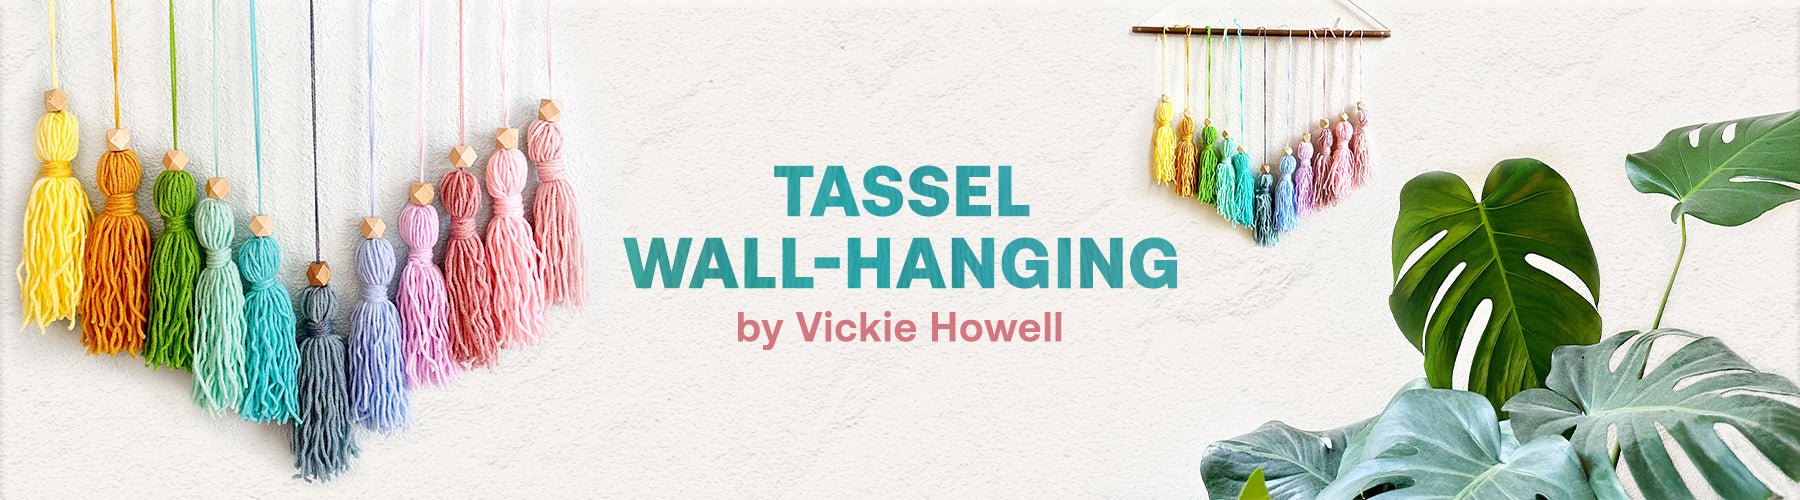 Tassel Wall-Hanging By Vickie Howell